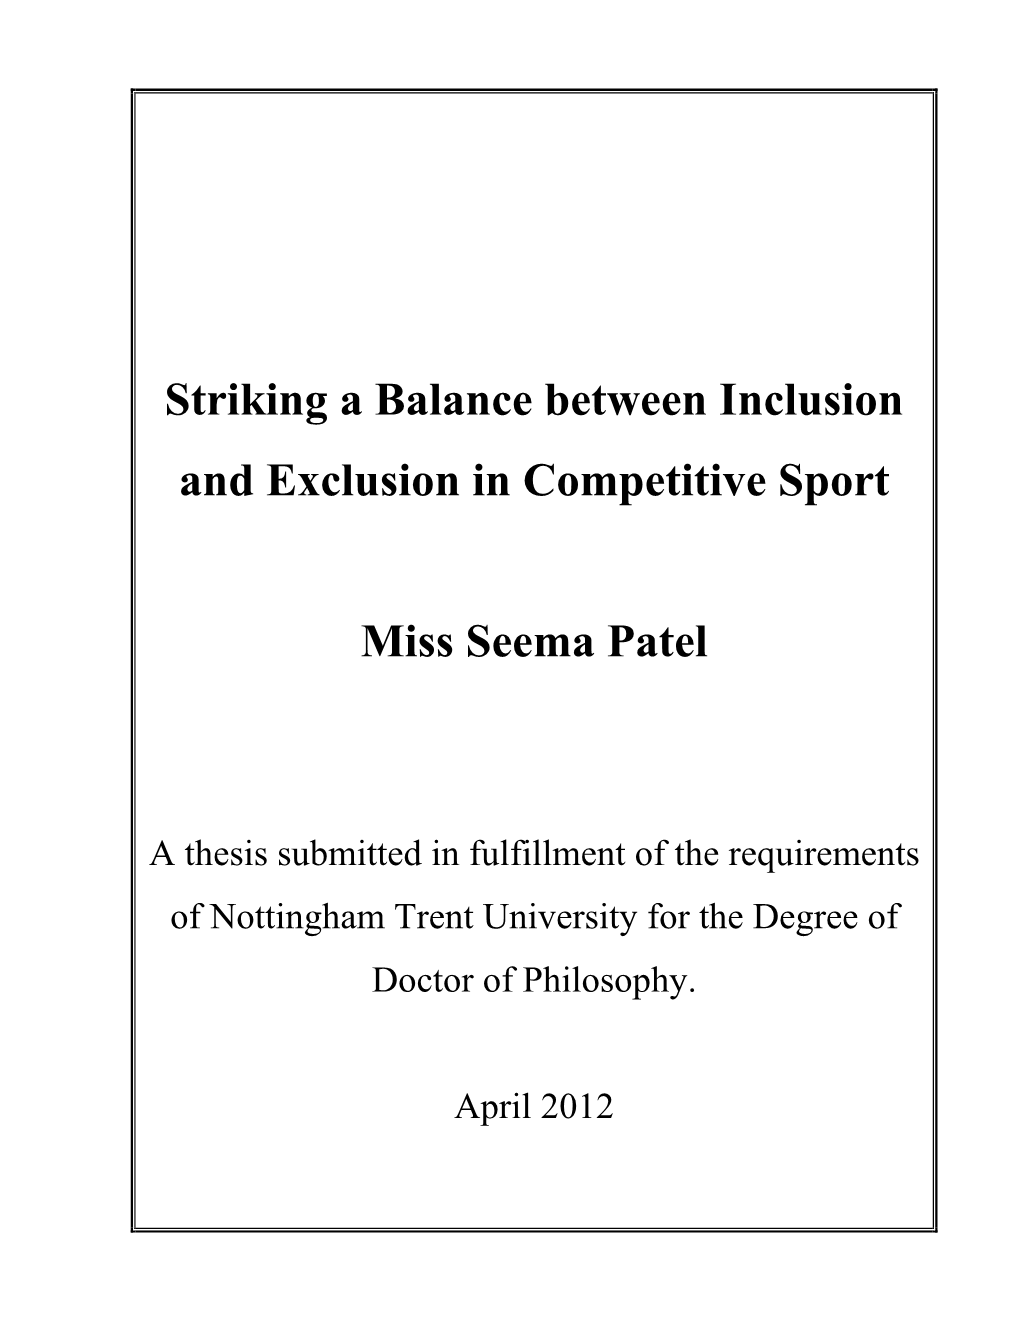 Striking a Balance Between Inclusion and Exclusion in Competitive Sport